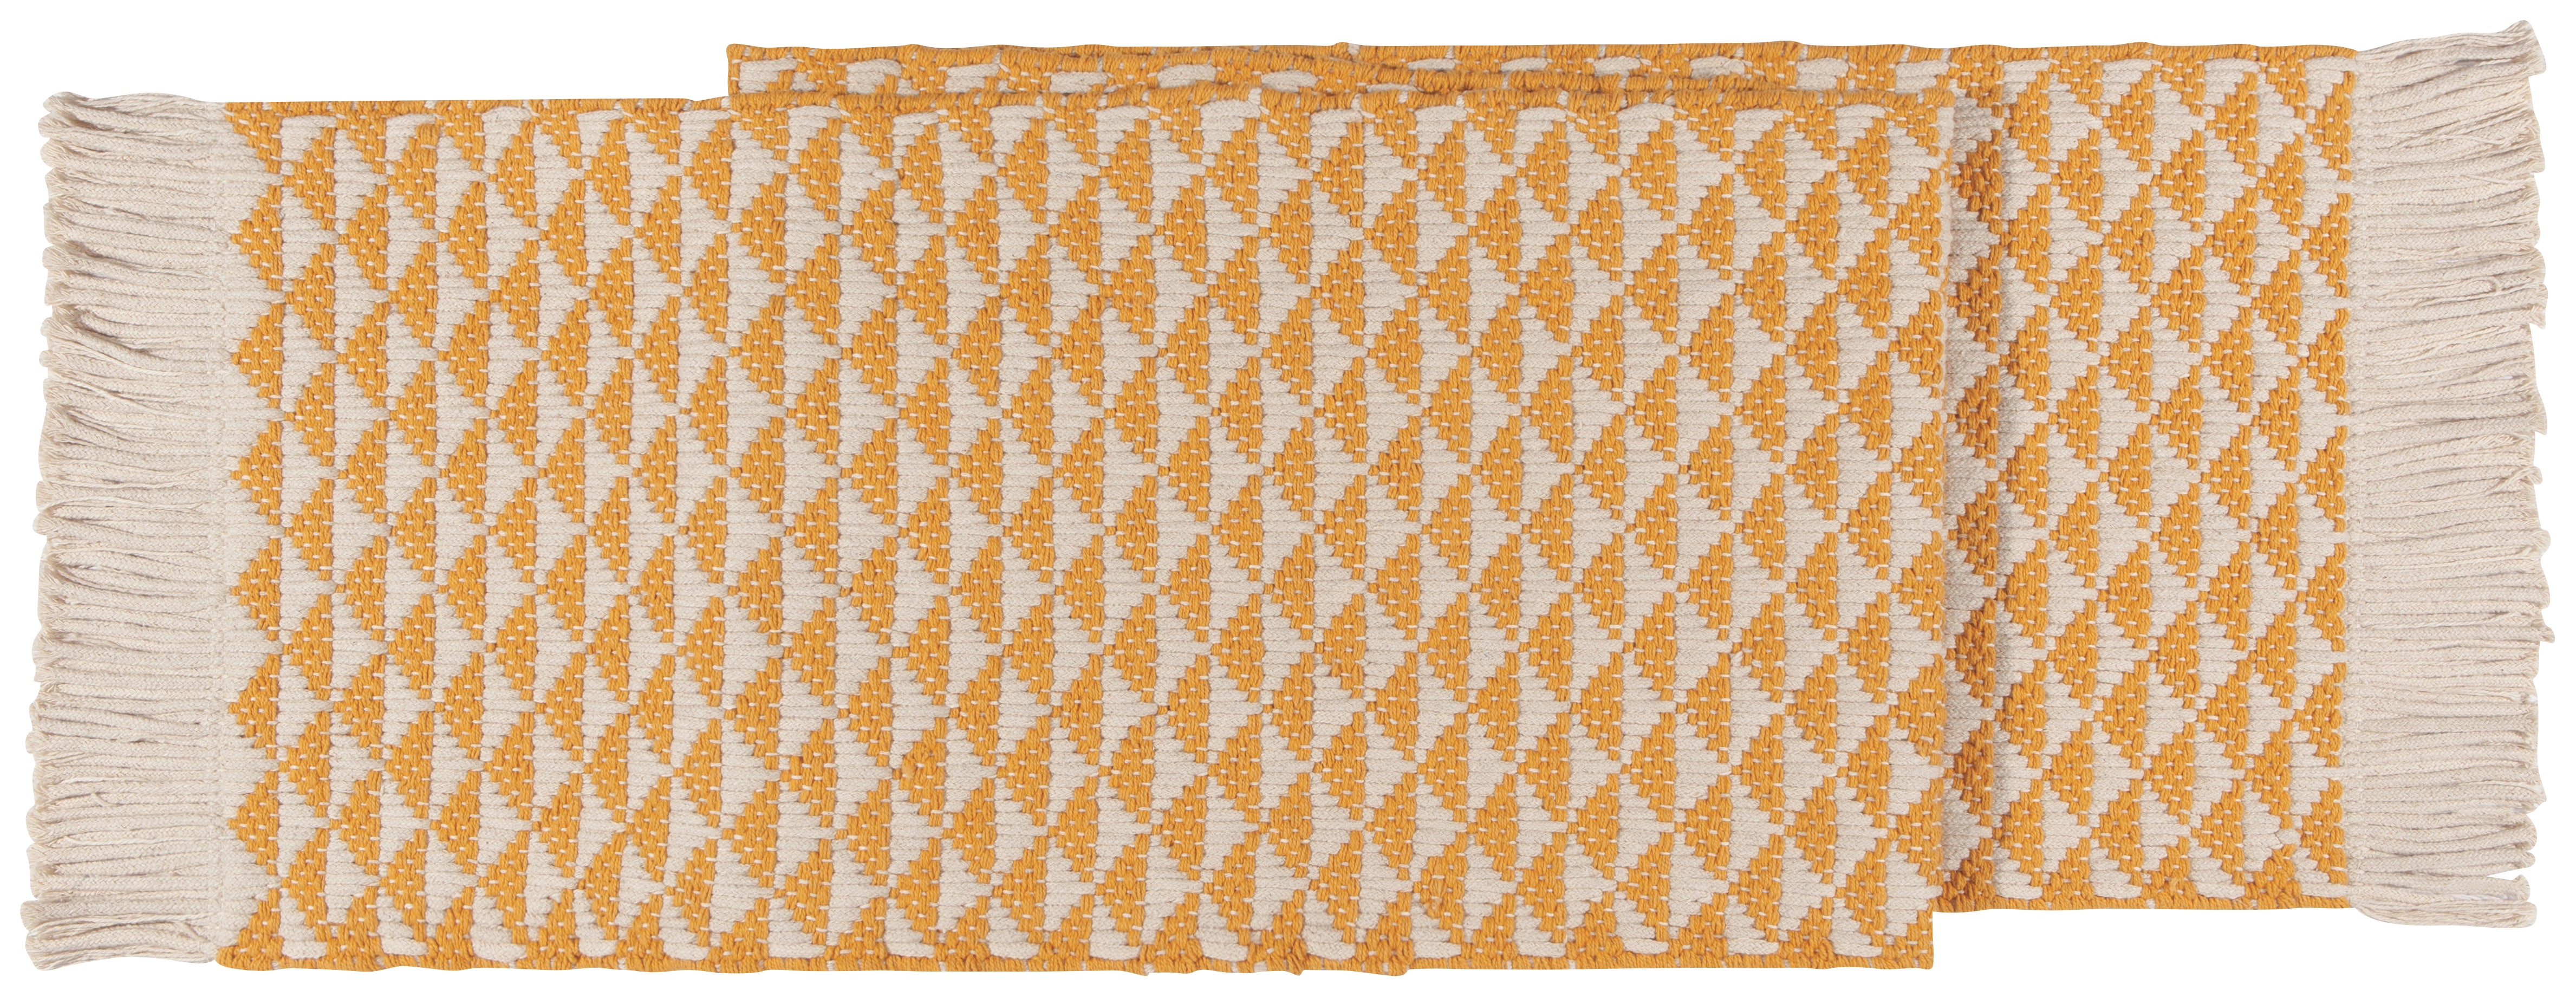 Orange and white semi-folded table runner with a triangular pattern